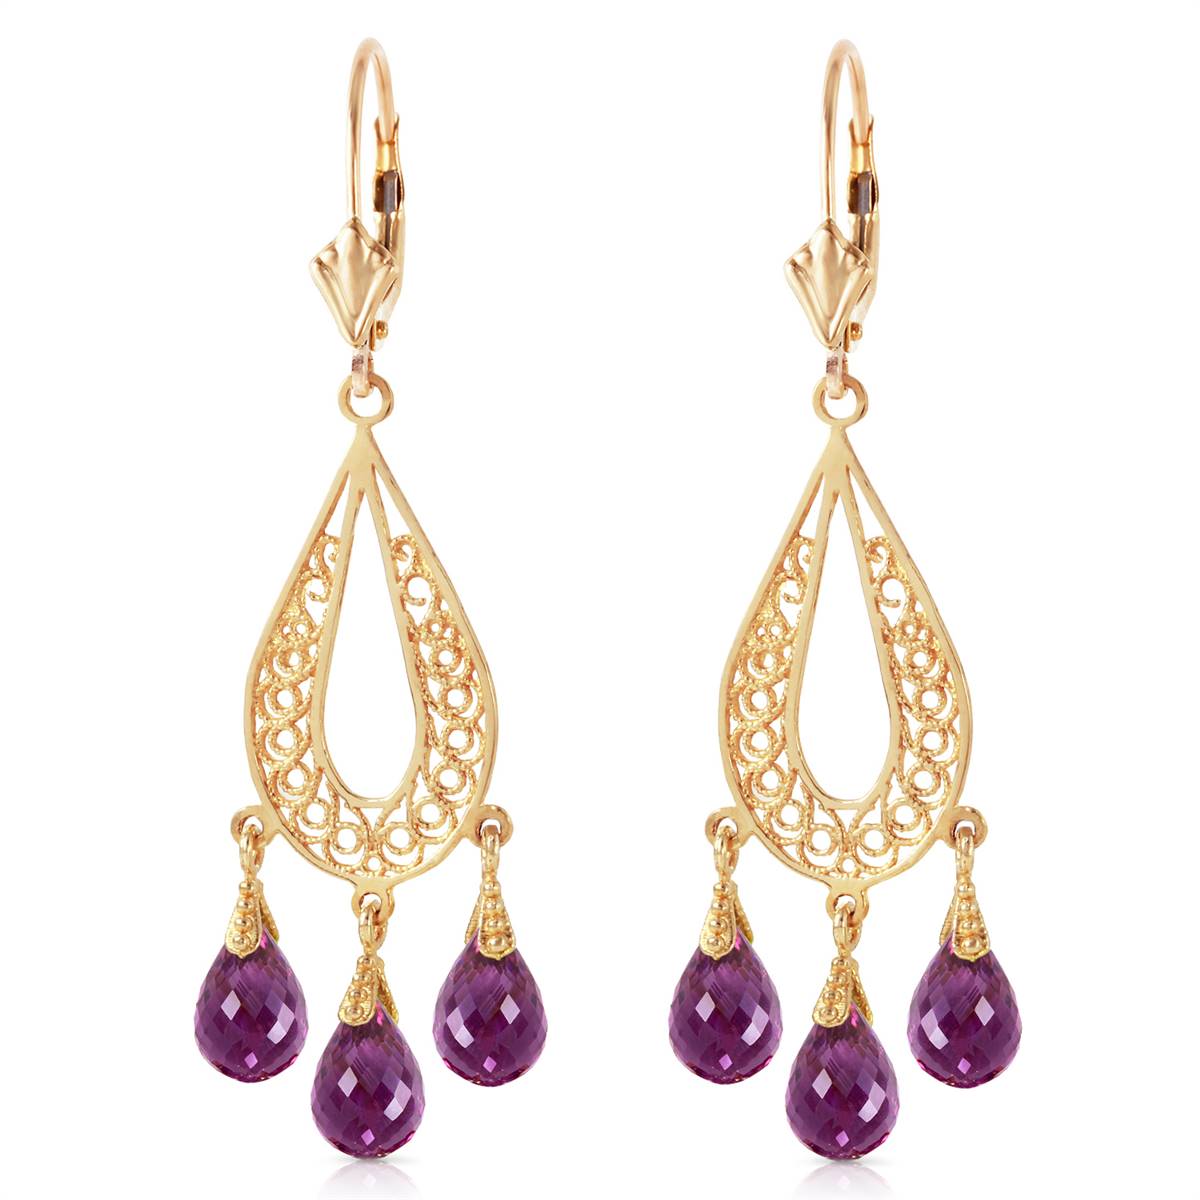 3.75 Carat 14K Solid Yellow Gold Chandelier Earrings Natural Amethyst